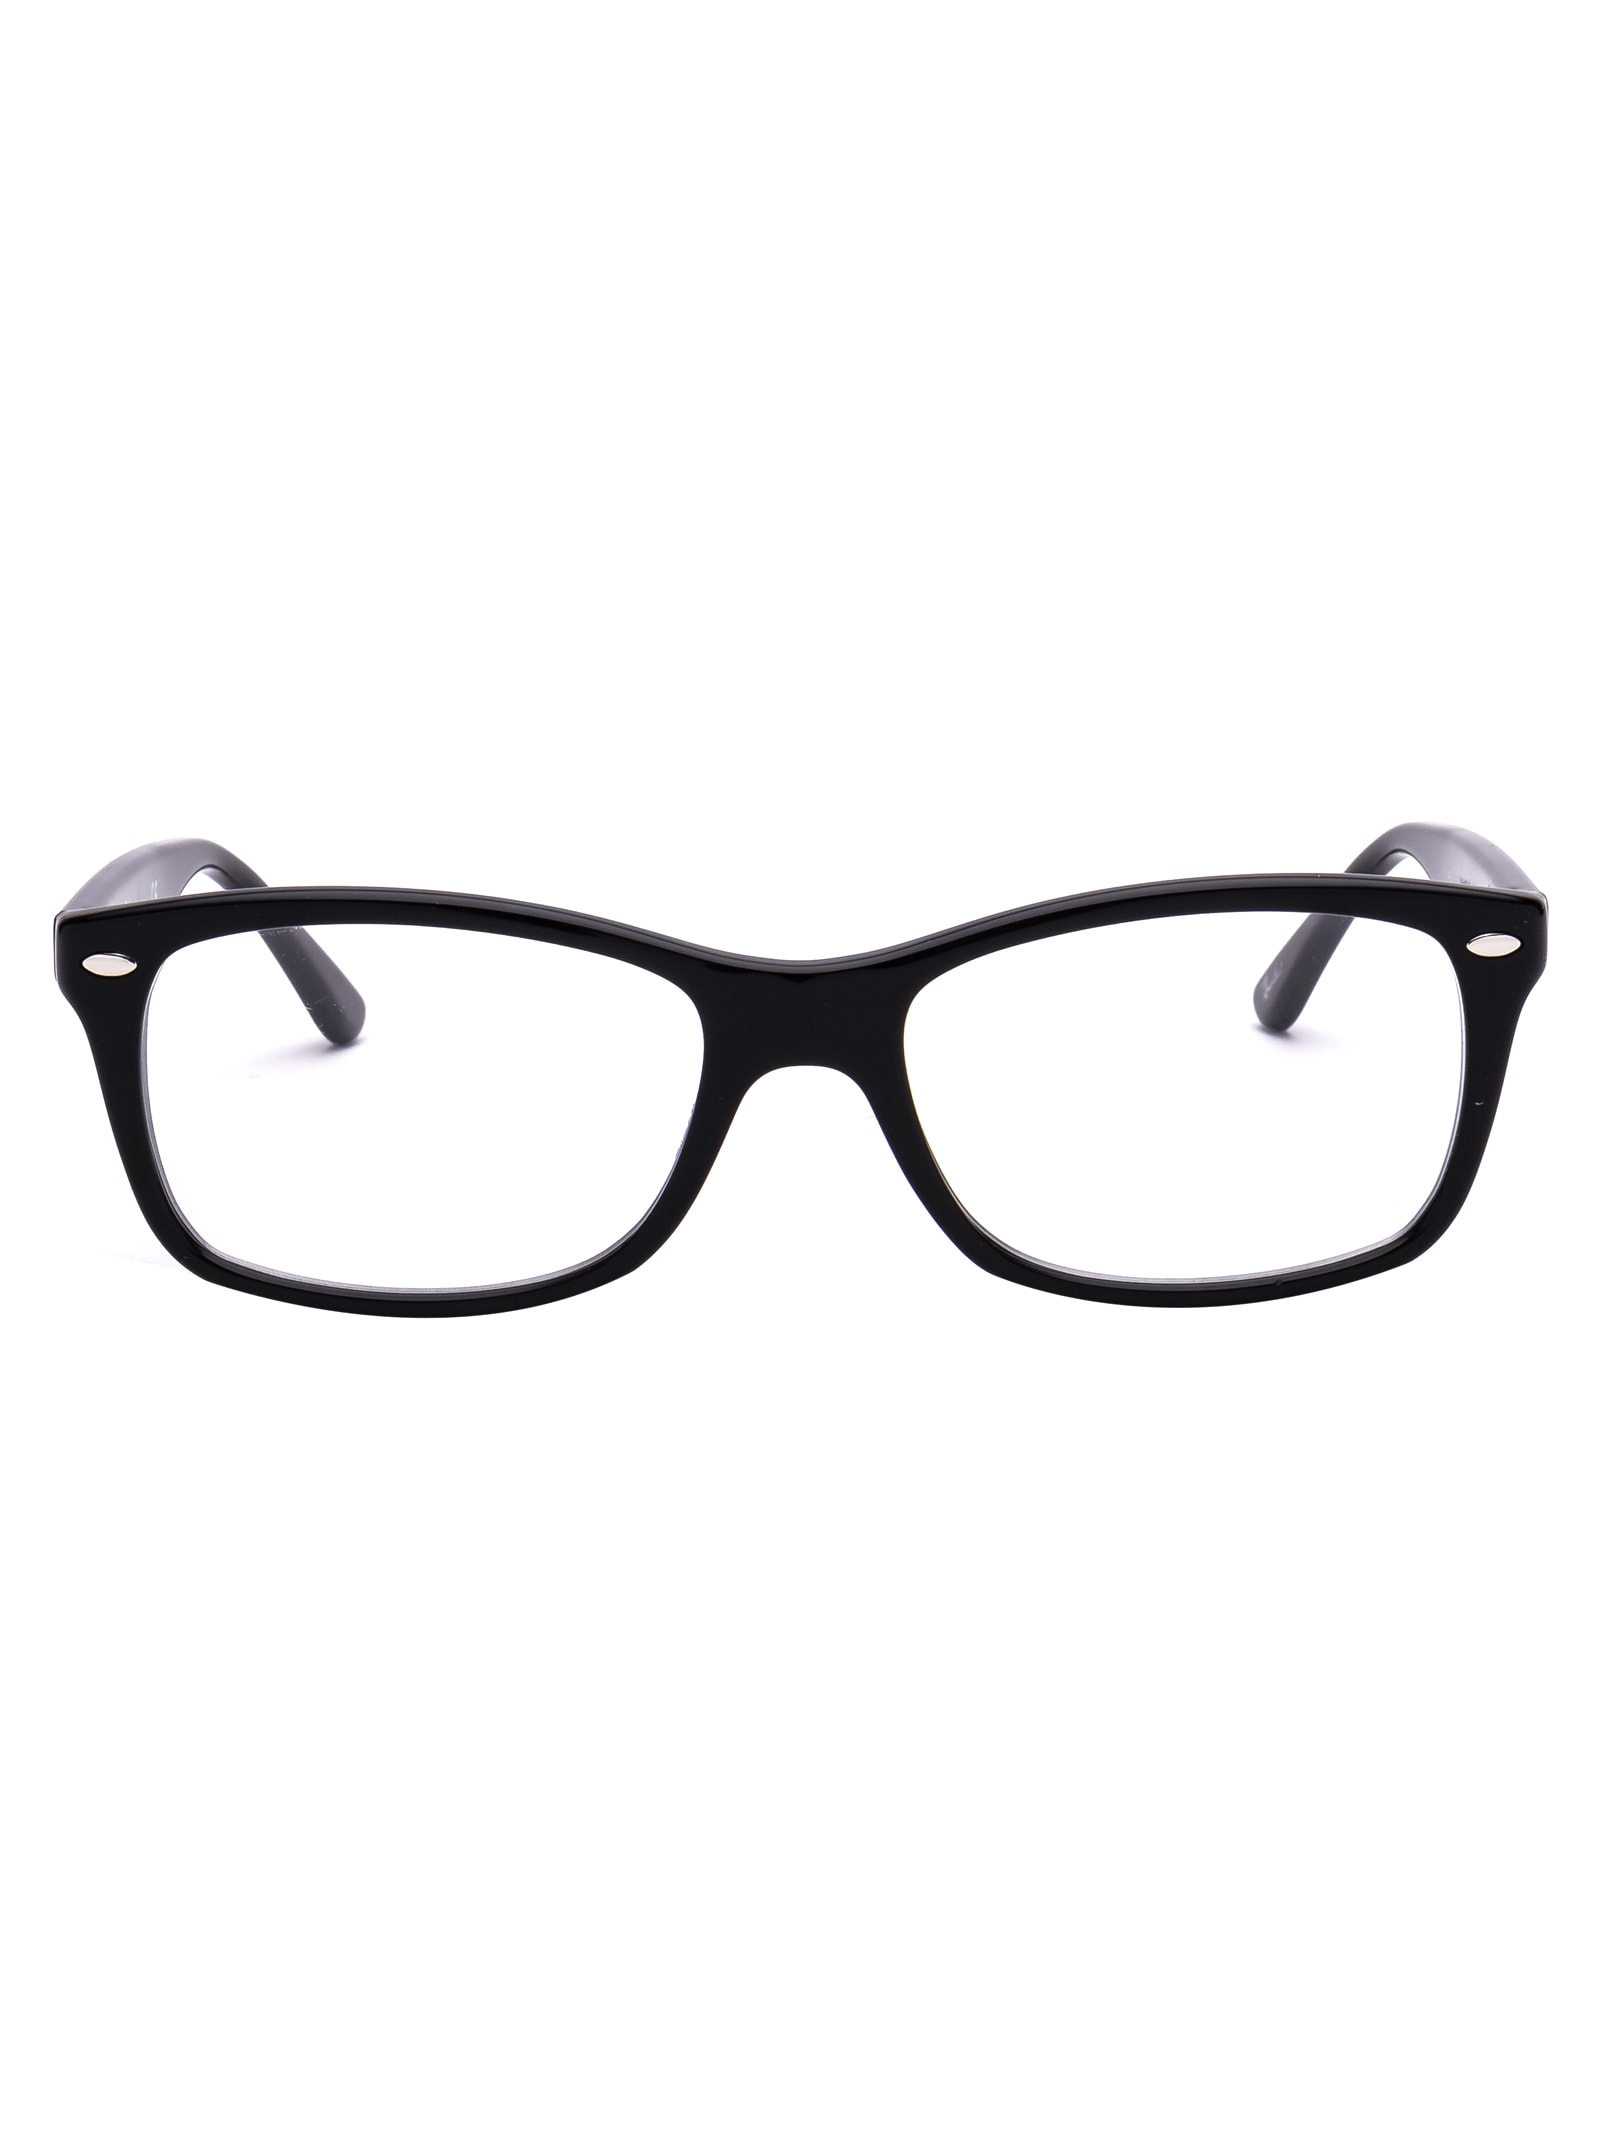 Ray Ban 0rx5228 Glasses In 2000 Black